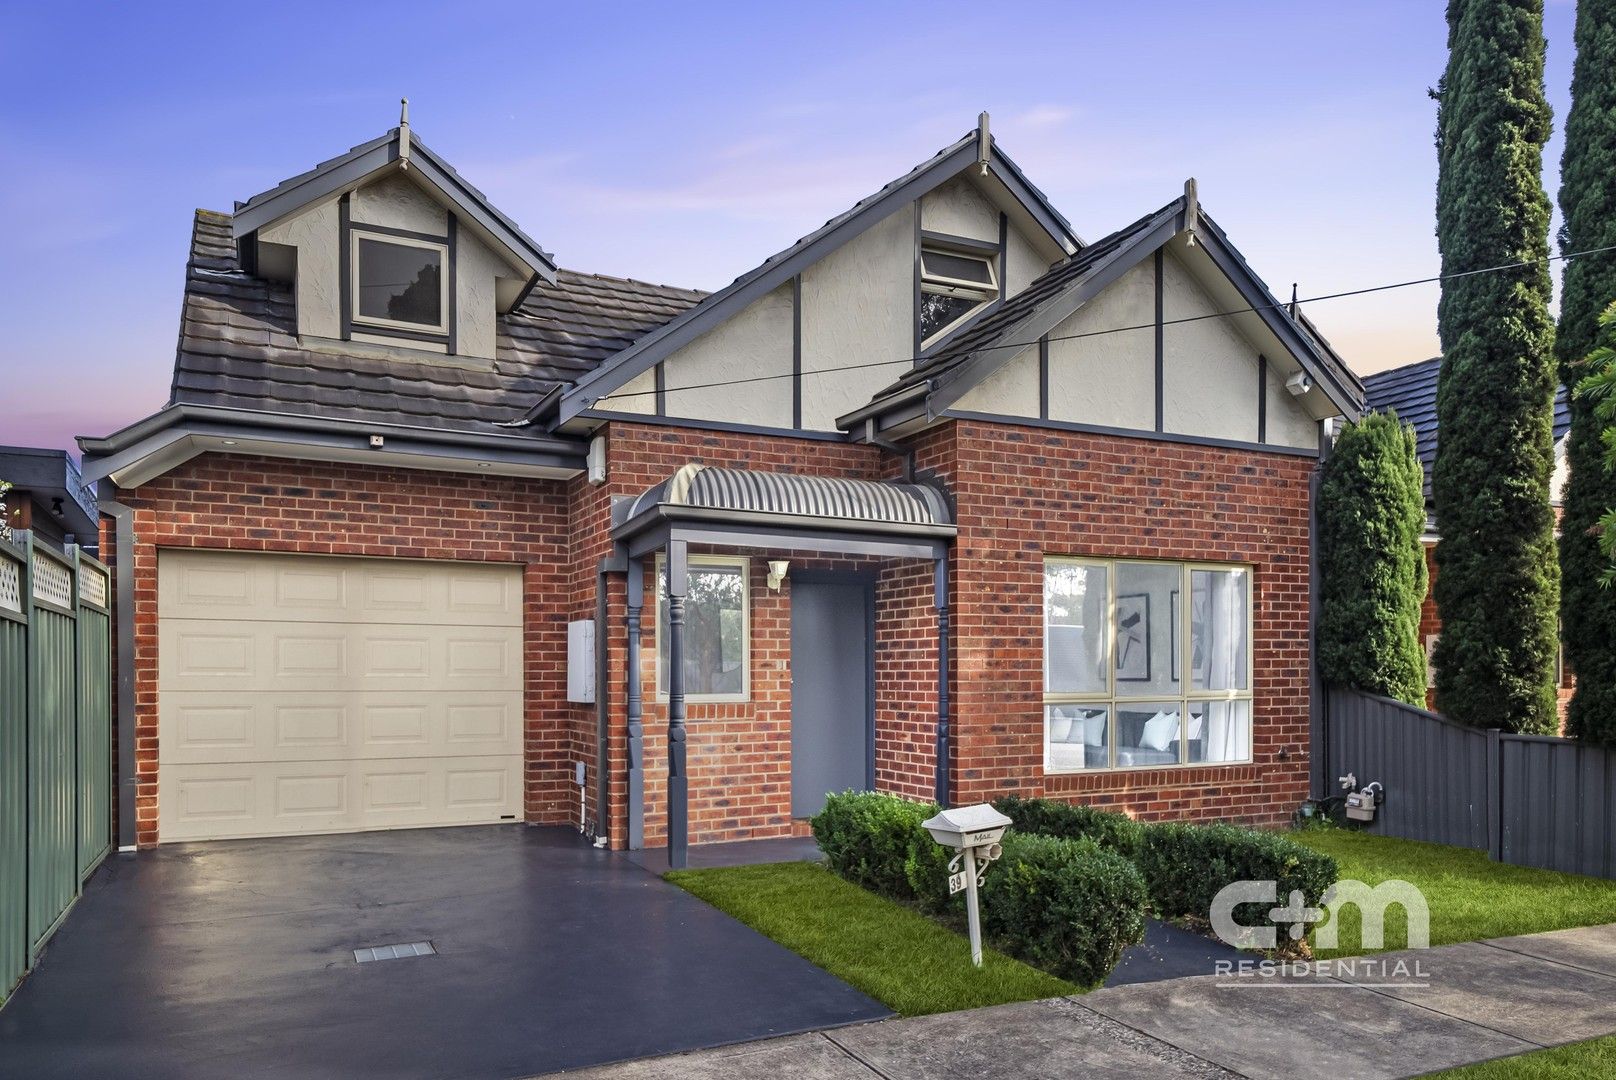 3 bedrooms Townhouse in 39 Anderson Street PASCOE VALE VIC, 3044